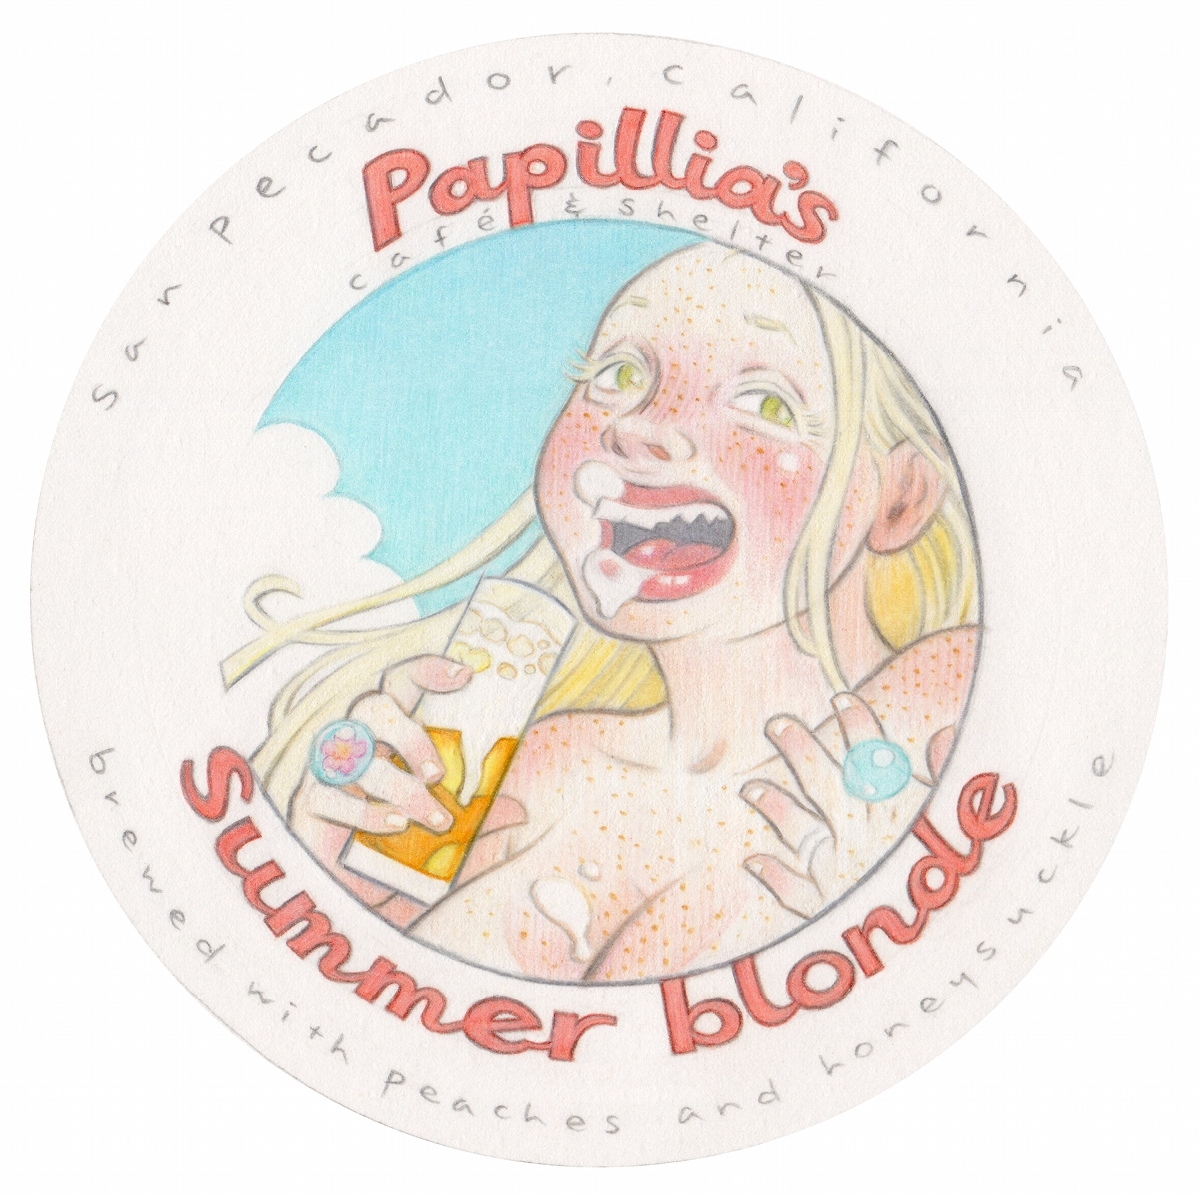 Summer Blonde, 2013, pencil on primed beer coaster, 4 x 4 inches, project for “BUZZ art.craft.beer,” curated by Peter Parpan  Portfolio